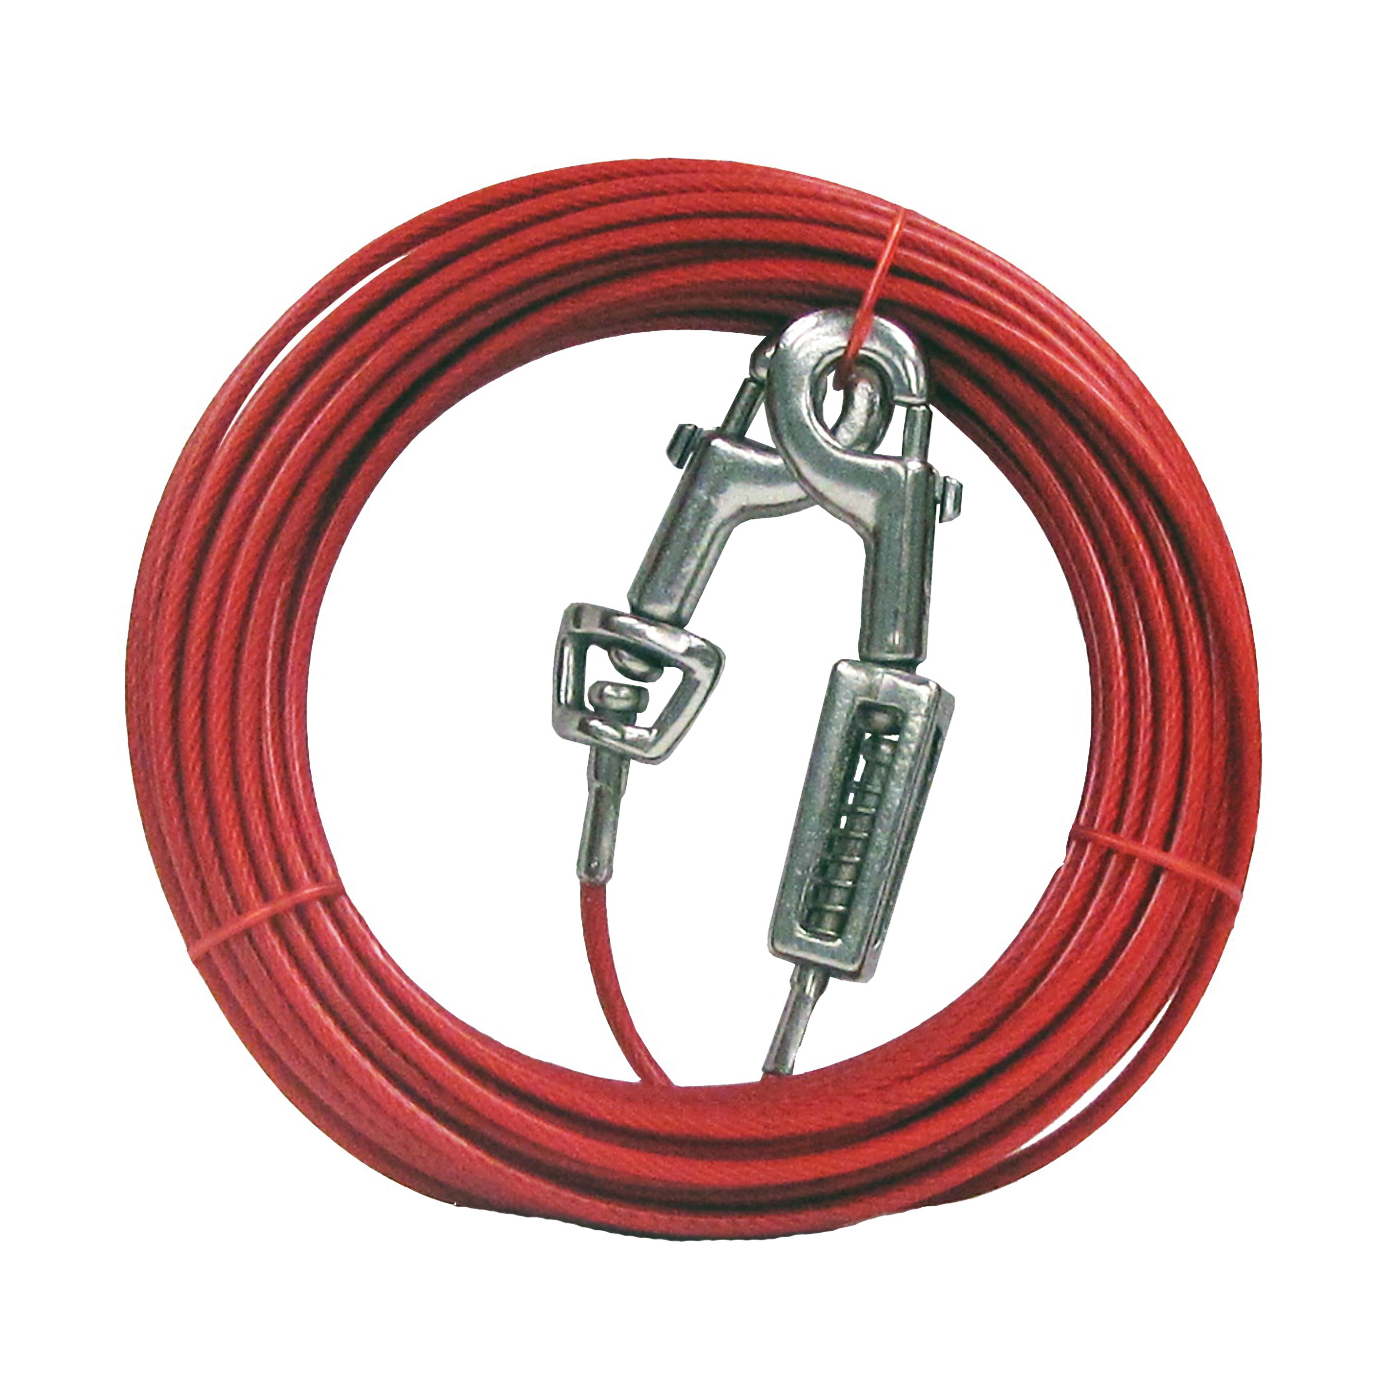 PDQ Q3540SPG99 Tie-Out with Spring, 40 ft L Belt/Cable, For: Large Dogs up to 60 lb